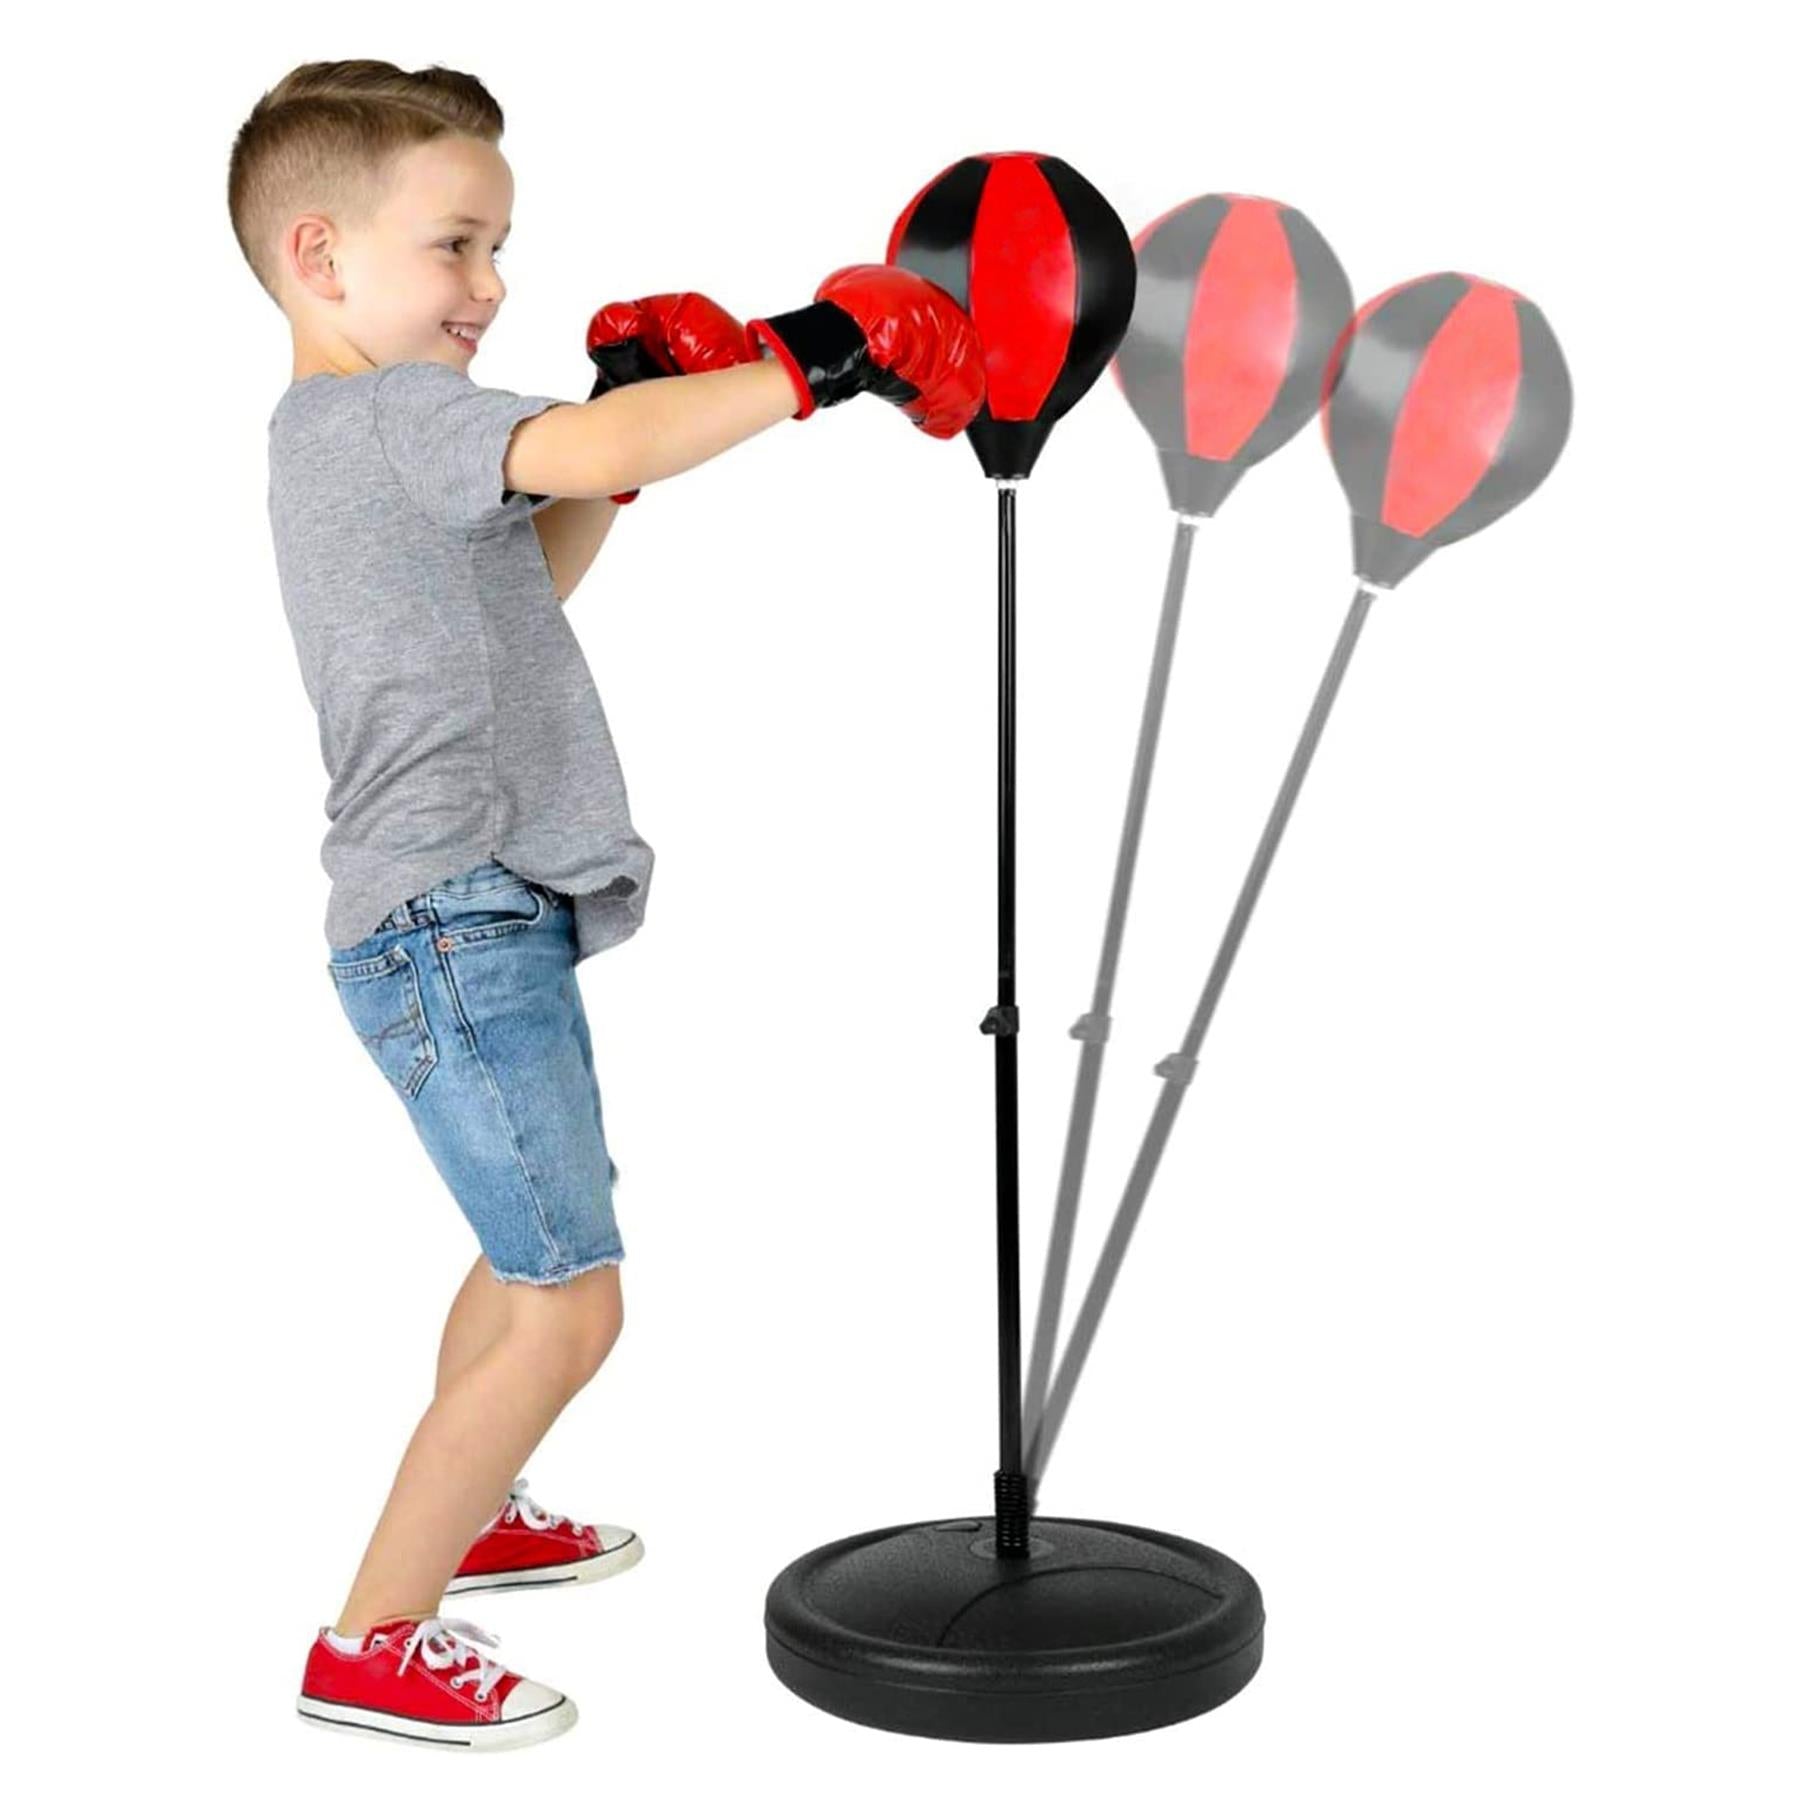 Freestanding Boxing Set Punch Ball Bag with Gloves by The Magic Toy Shop - The Magic Toy Shop